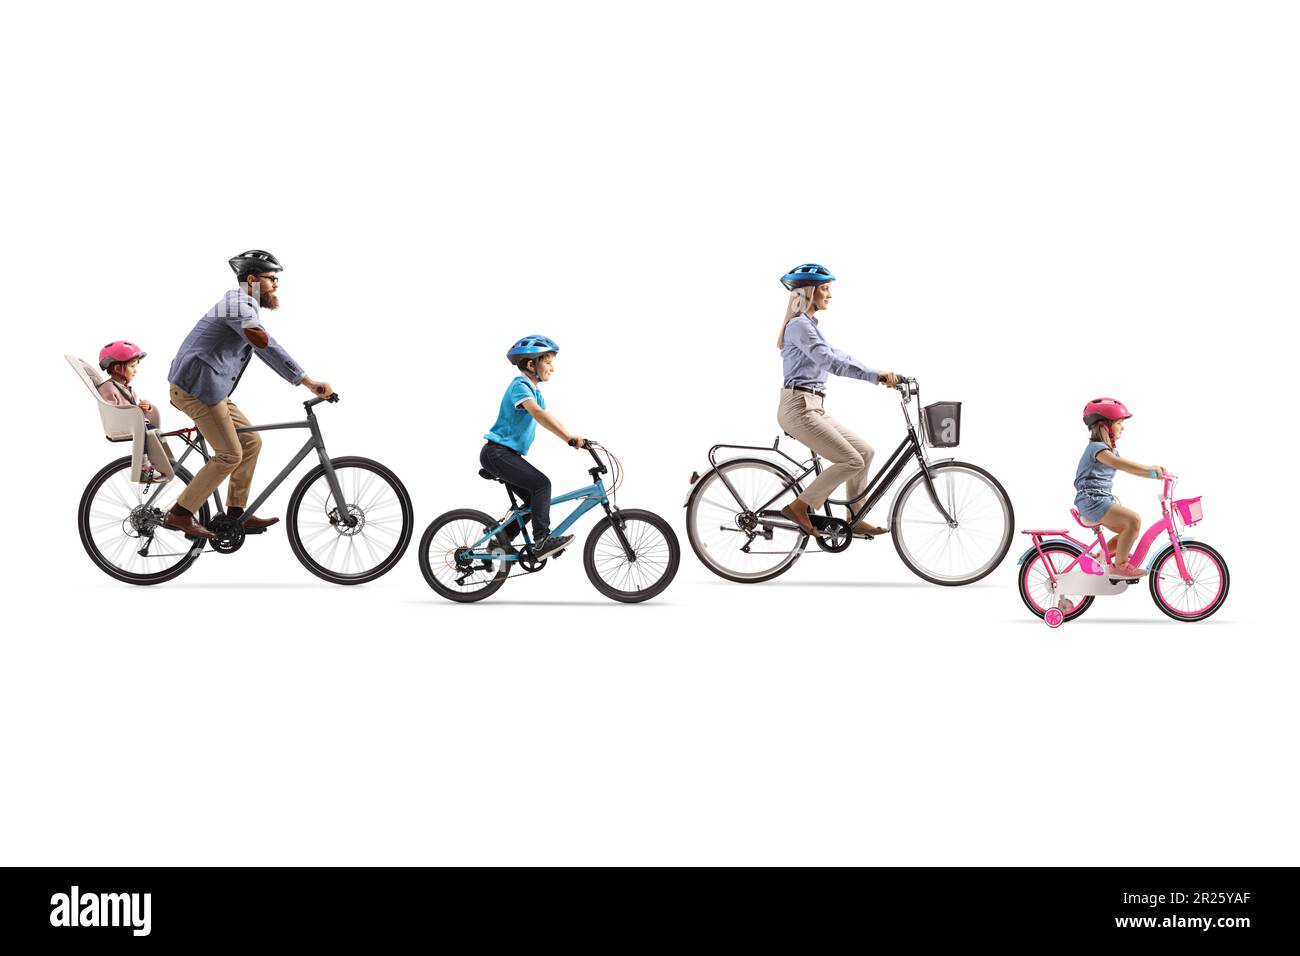 Family with three children riding bicycles isolated on white background Stock Photo